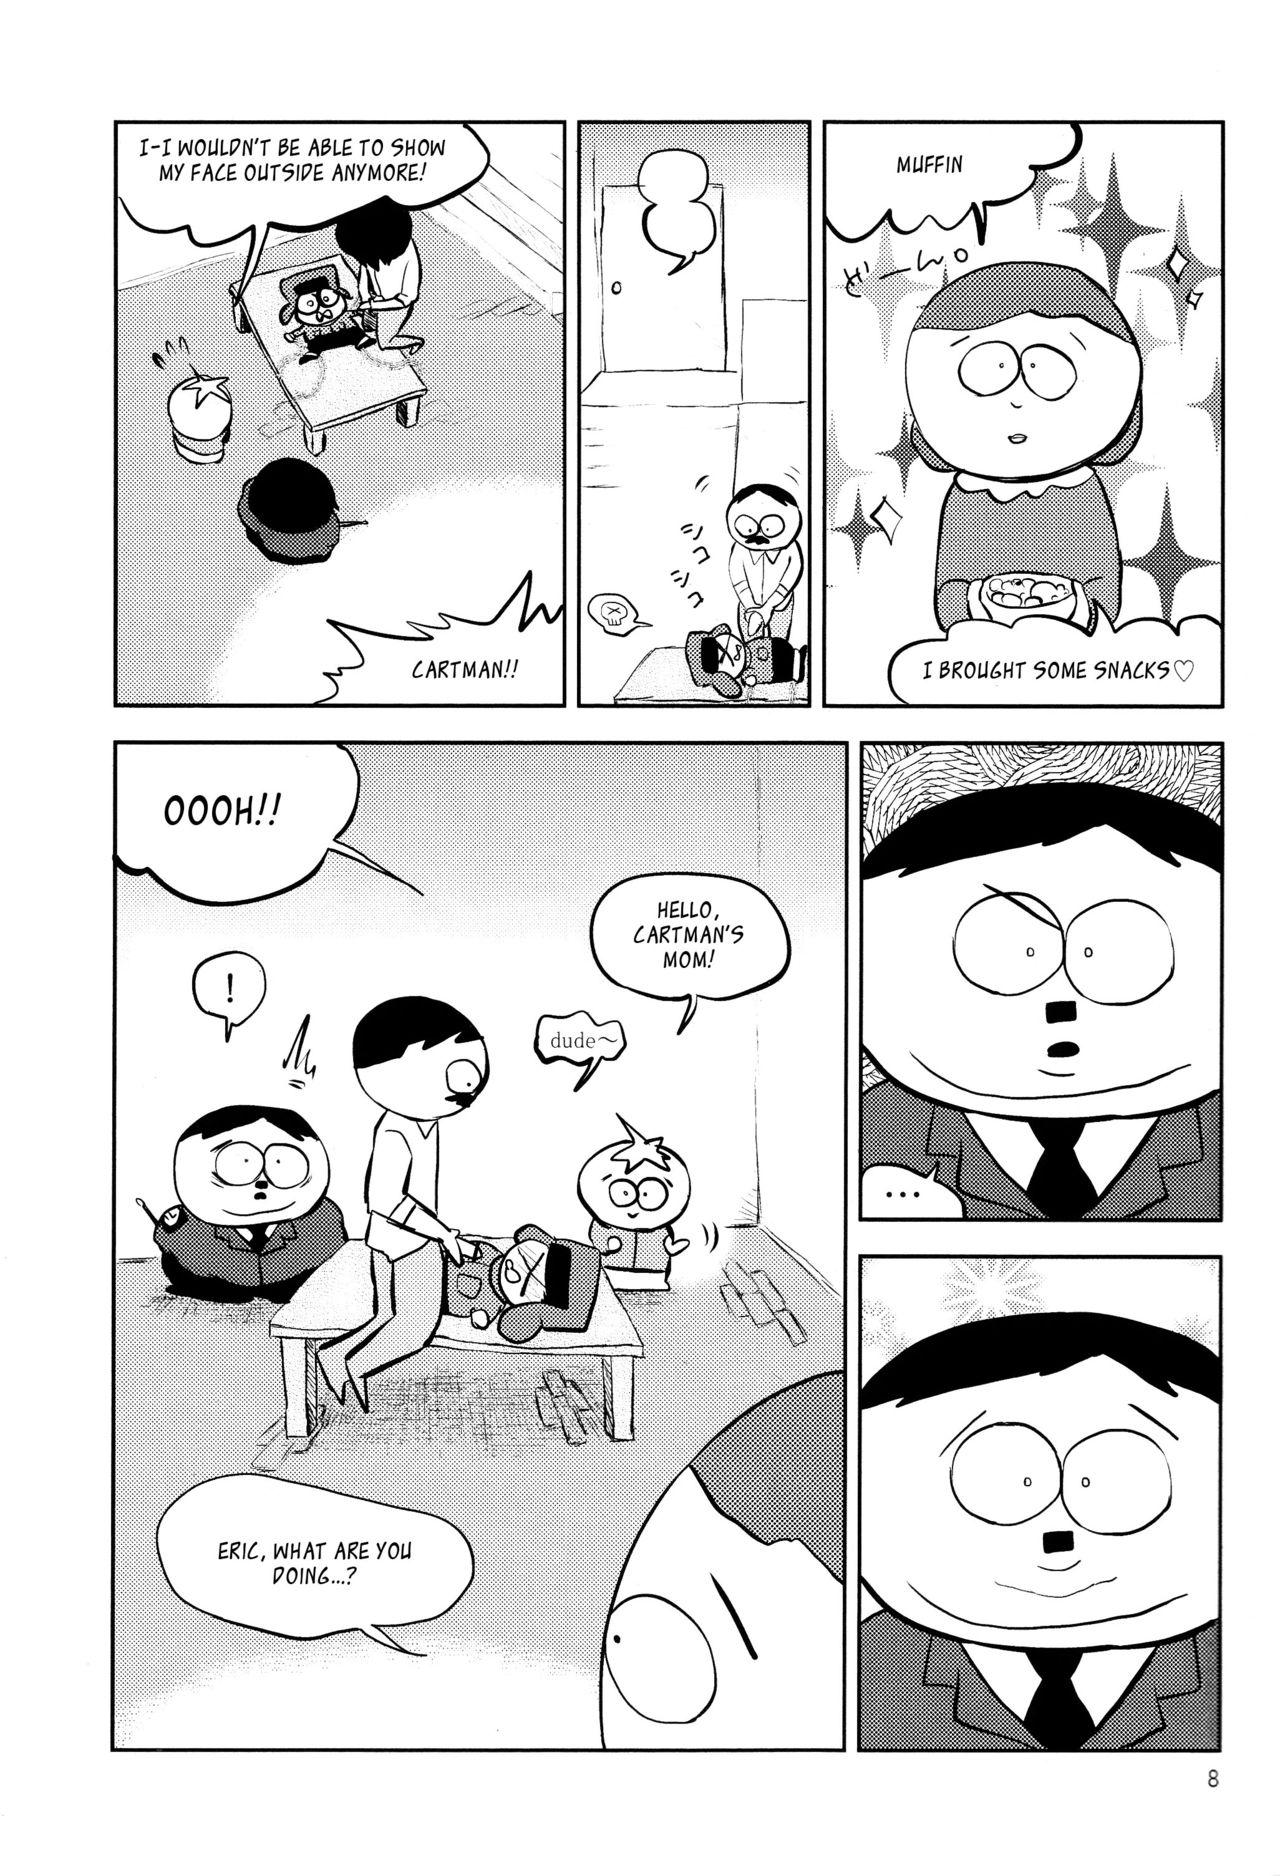 Condom Lovely Hitler's Counterattack - South park Bush - Page 8